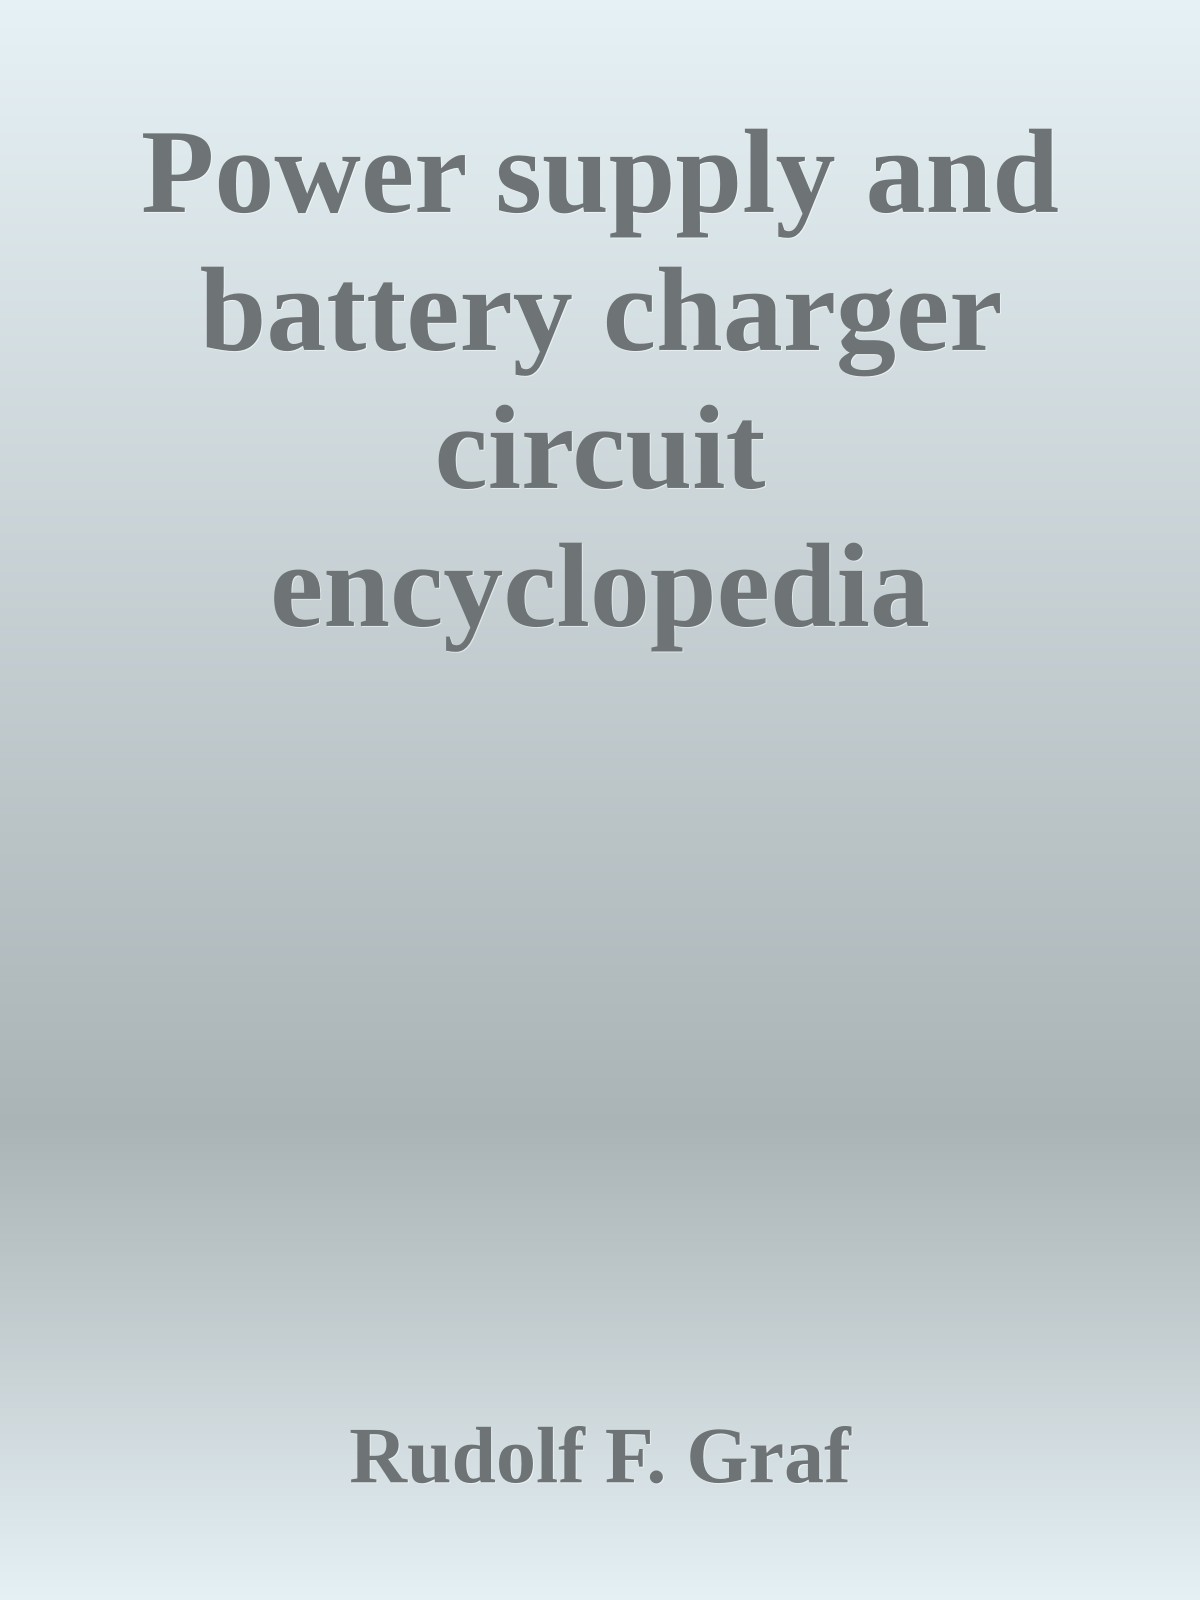 Power supply and battery charger circuit encyclopedia